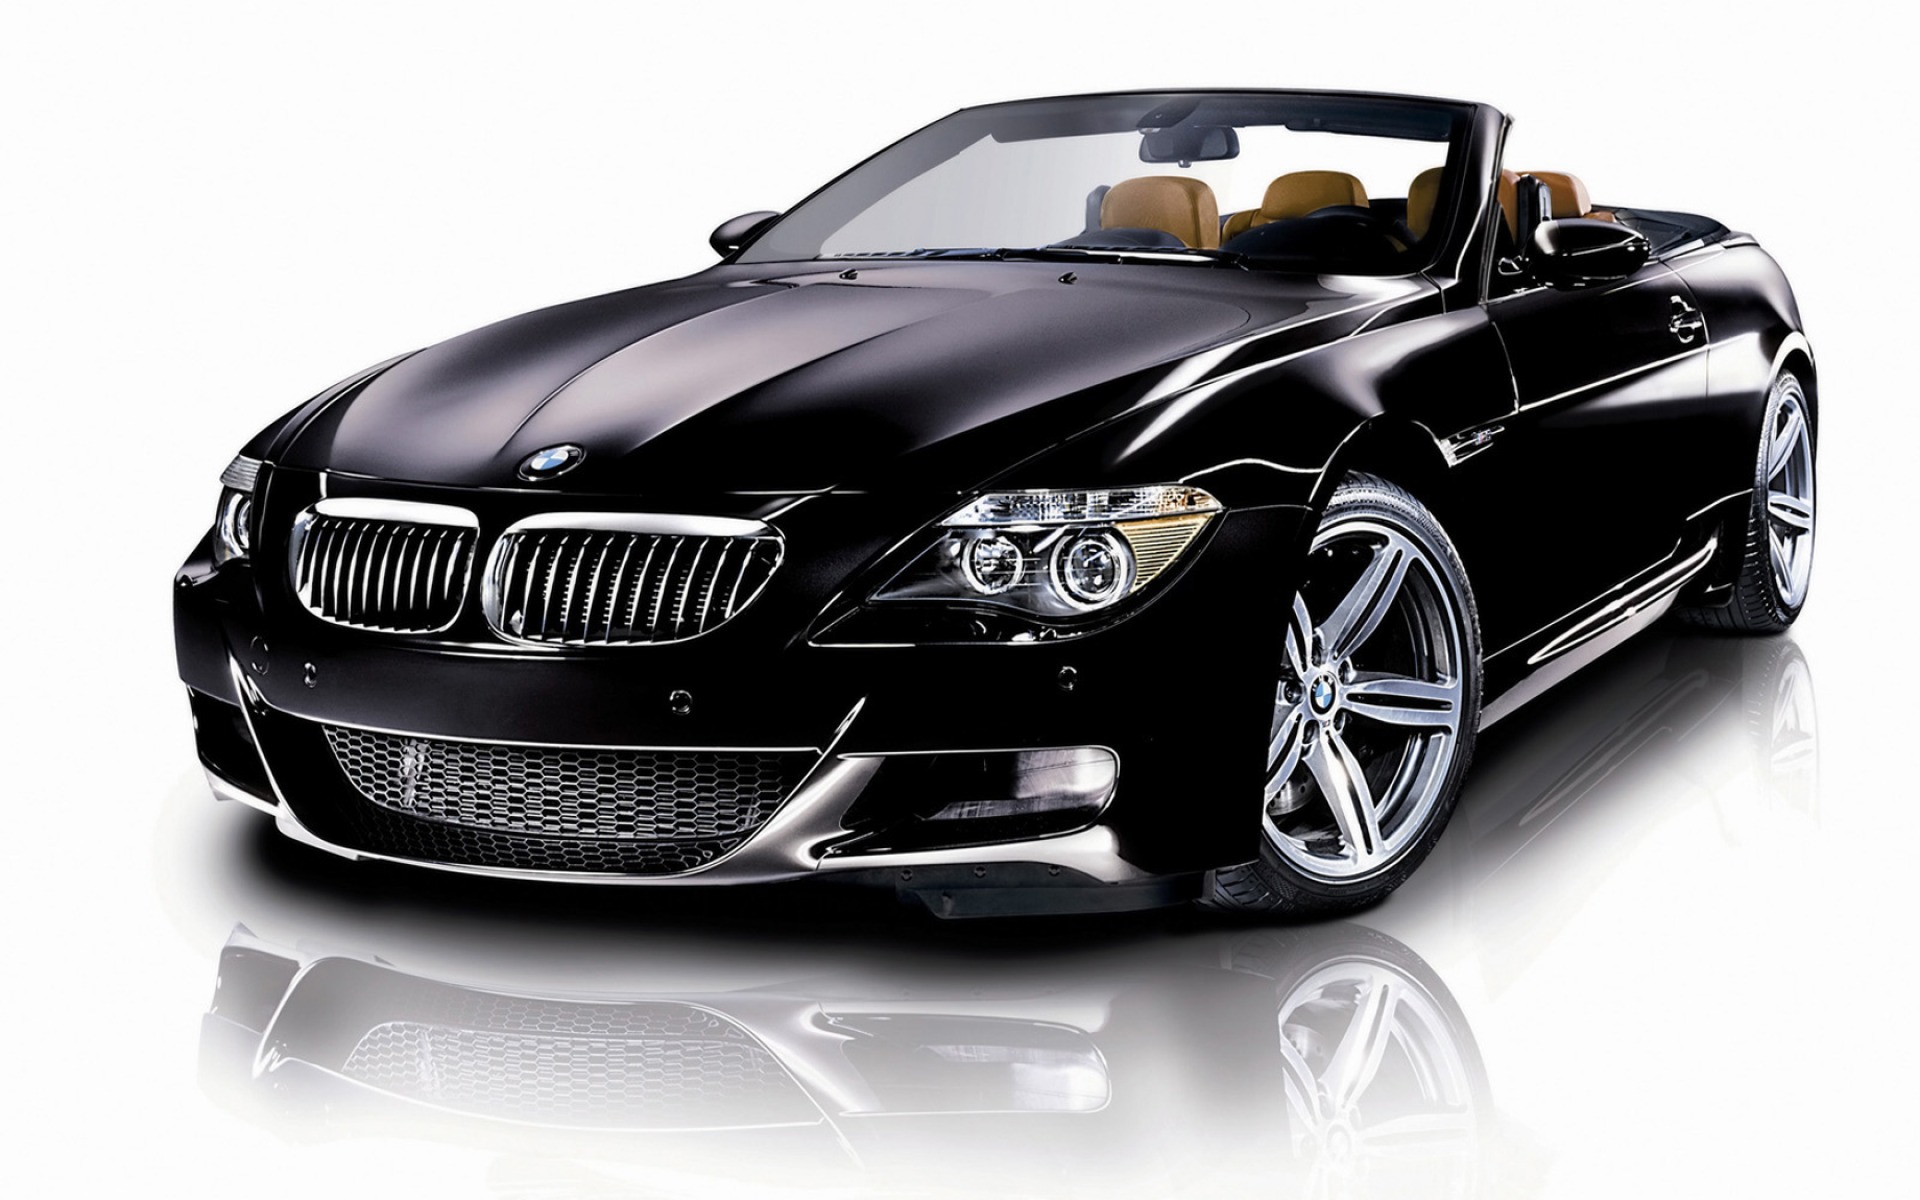 Bmw M6 Convertible Wallpaper Bmw Cars Wallpapers In Jpg Format For Free Download